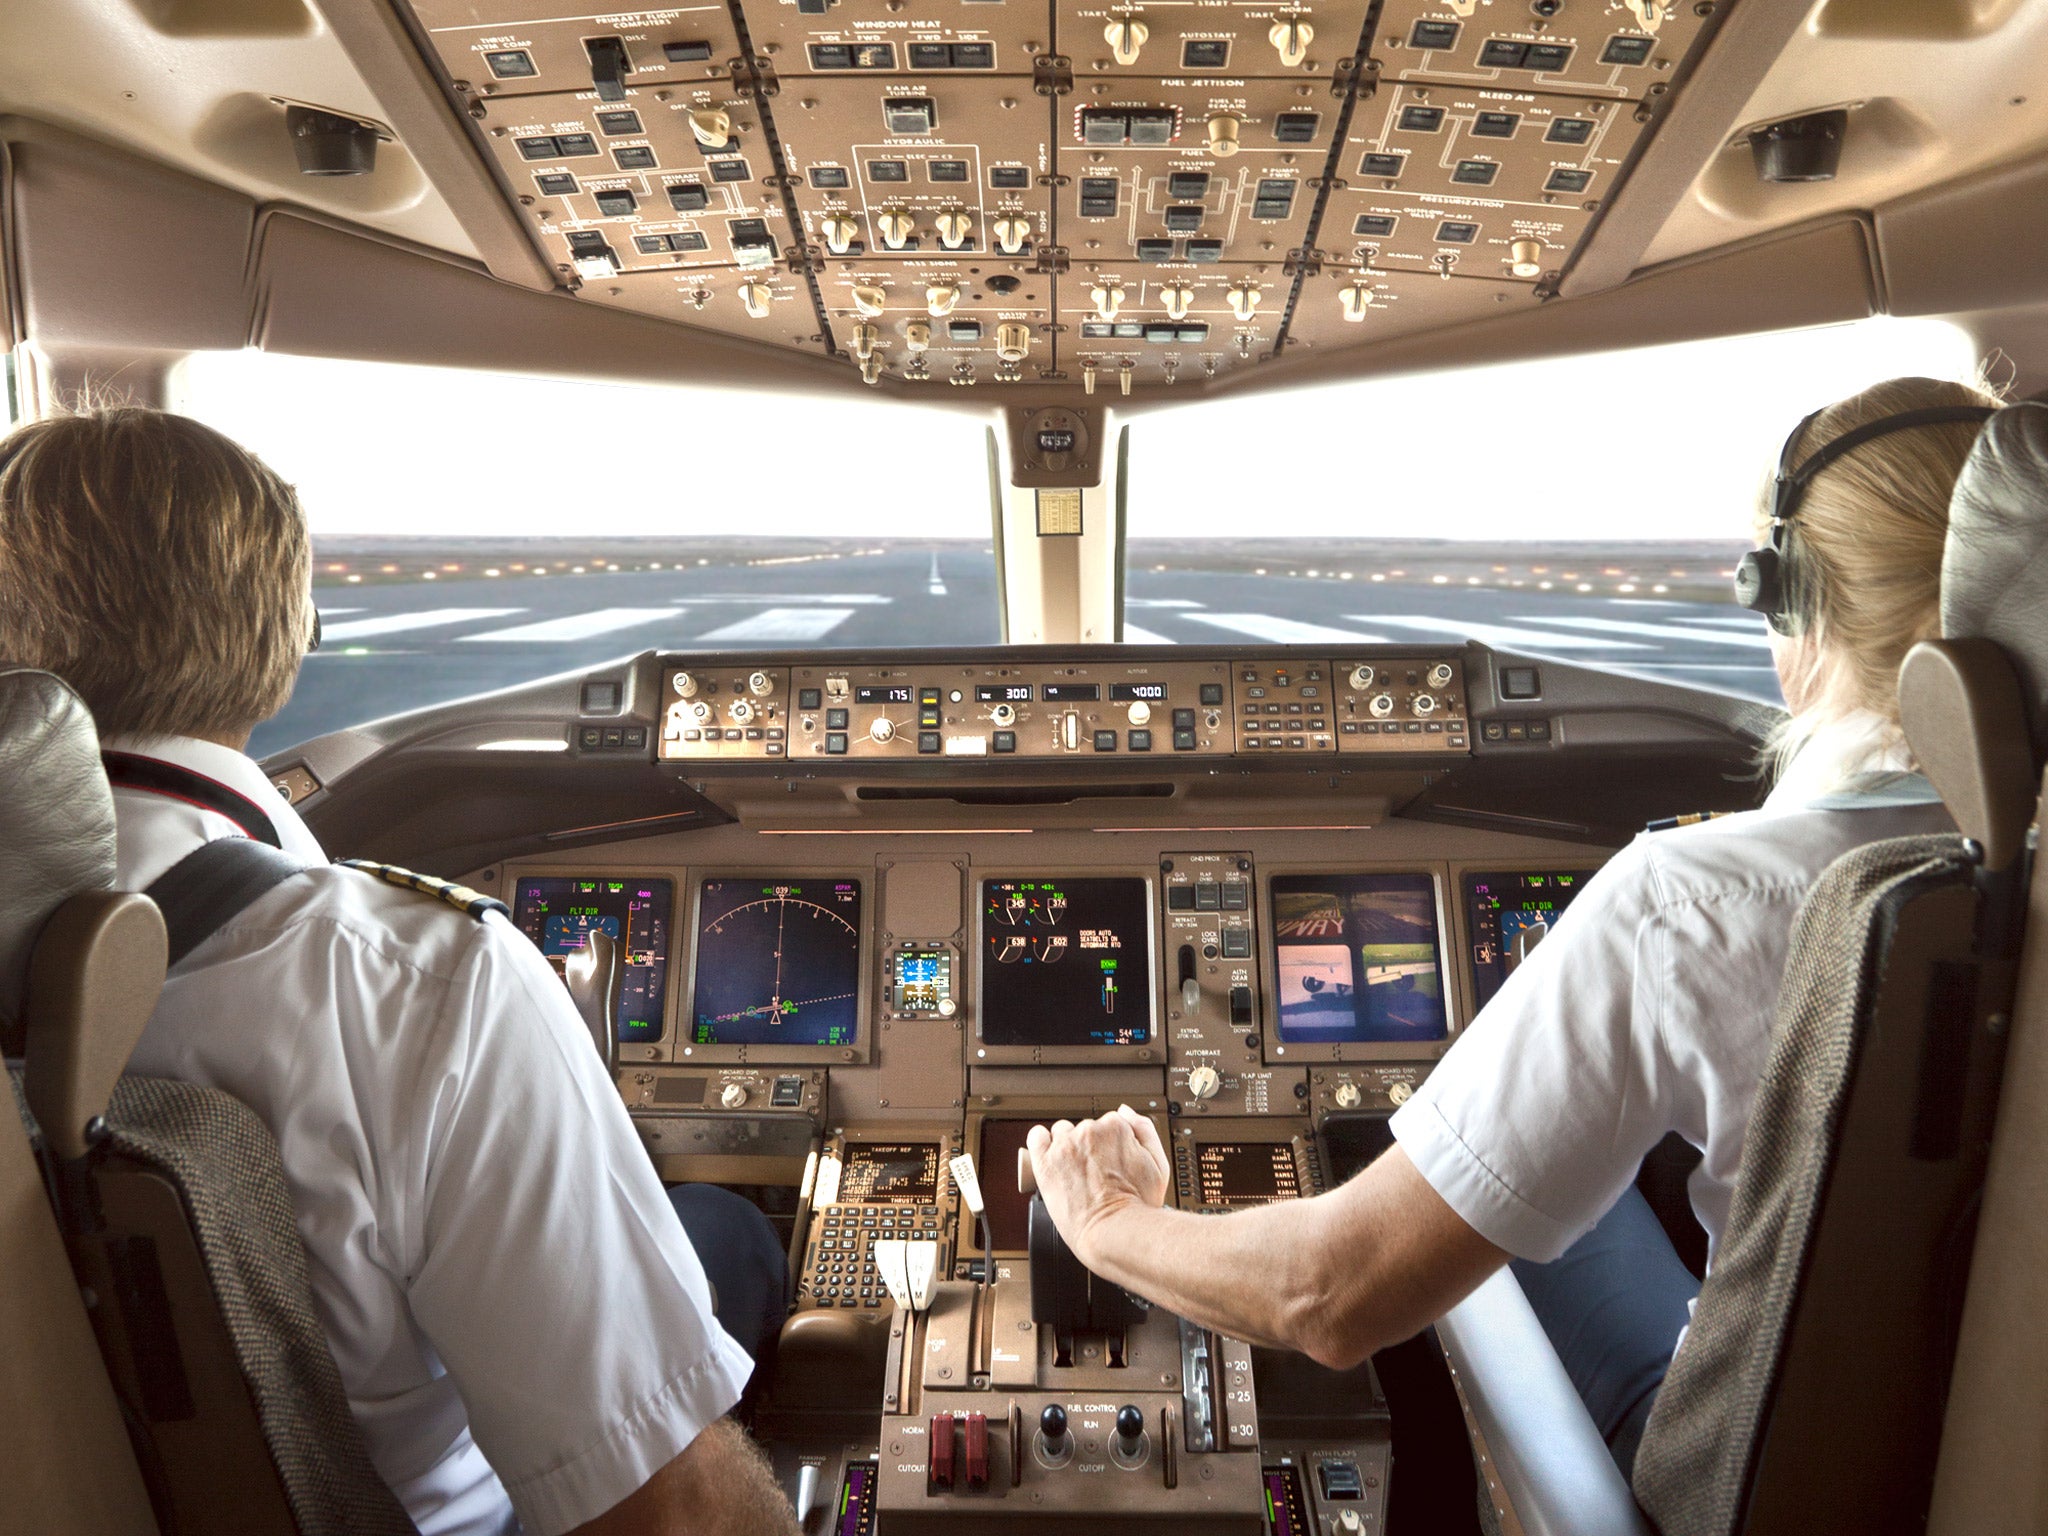 The research suggests for pilots to wear sunscreen when flying